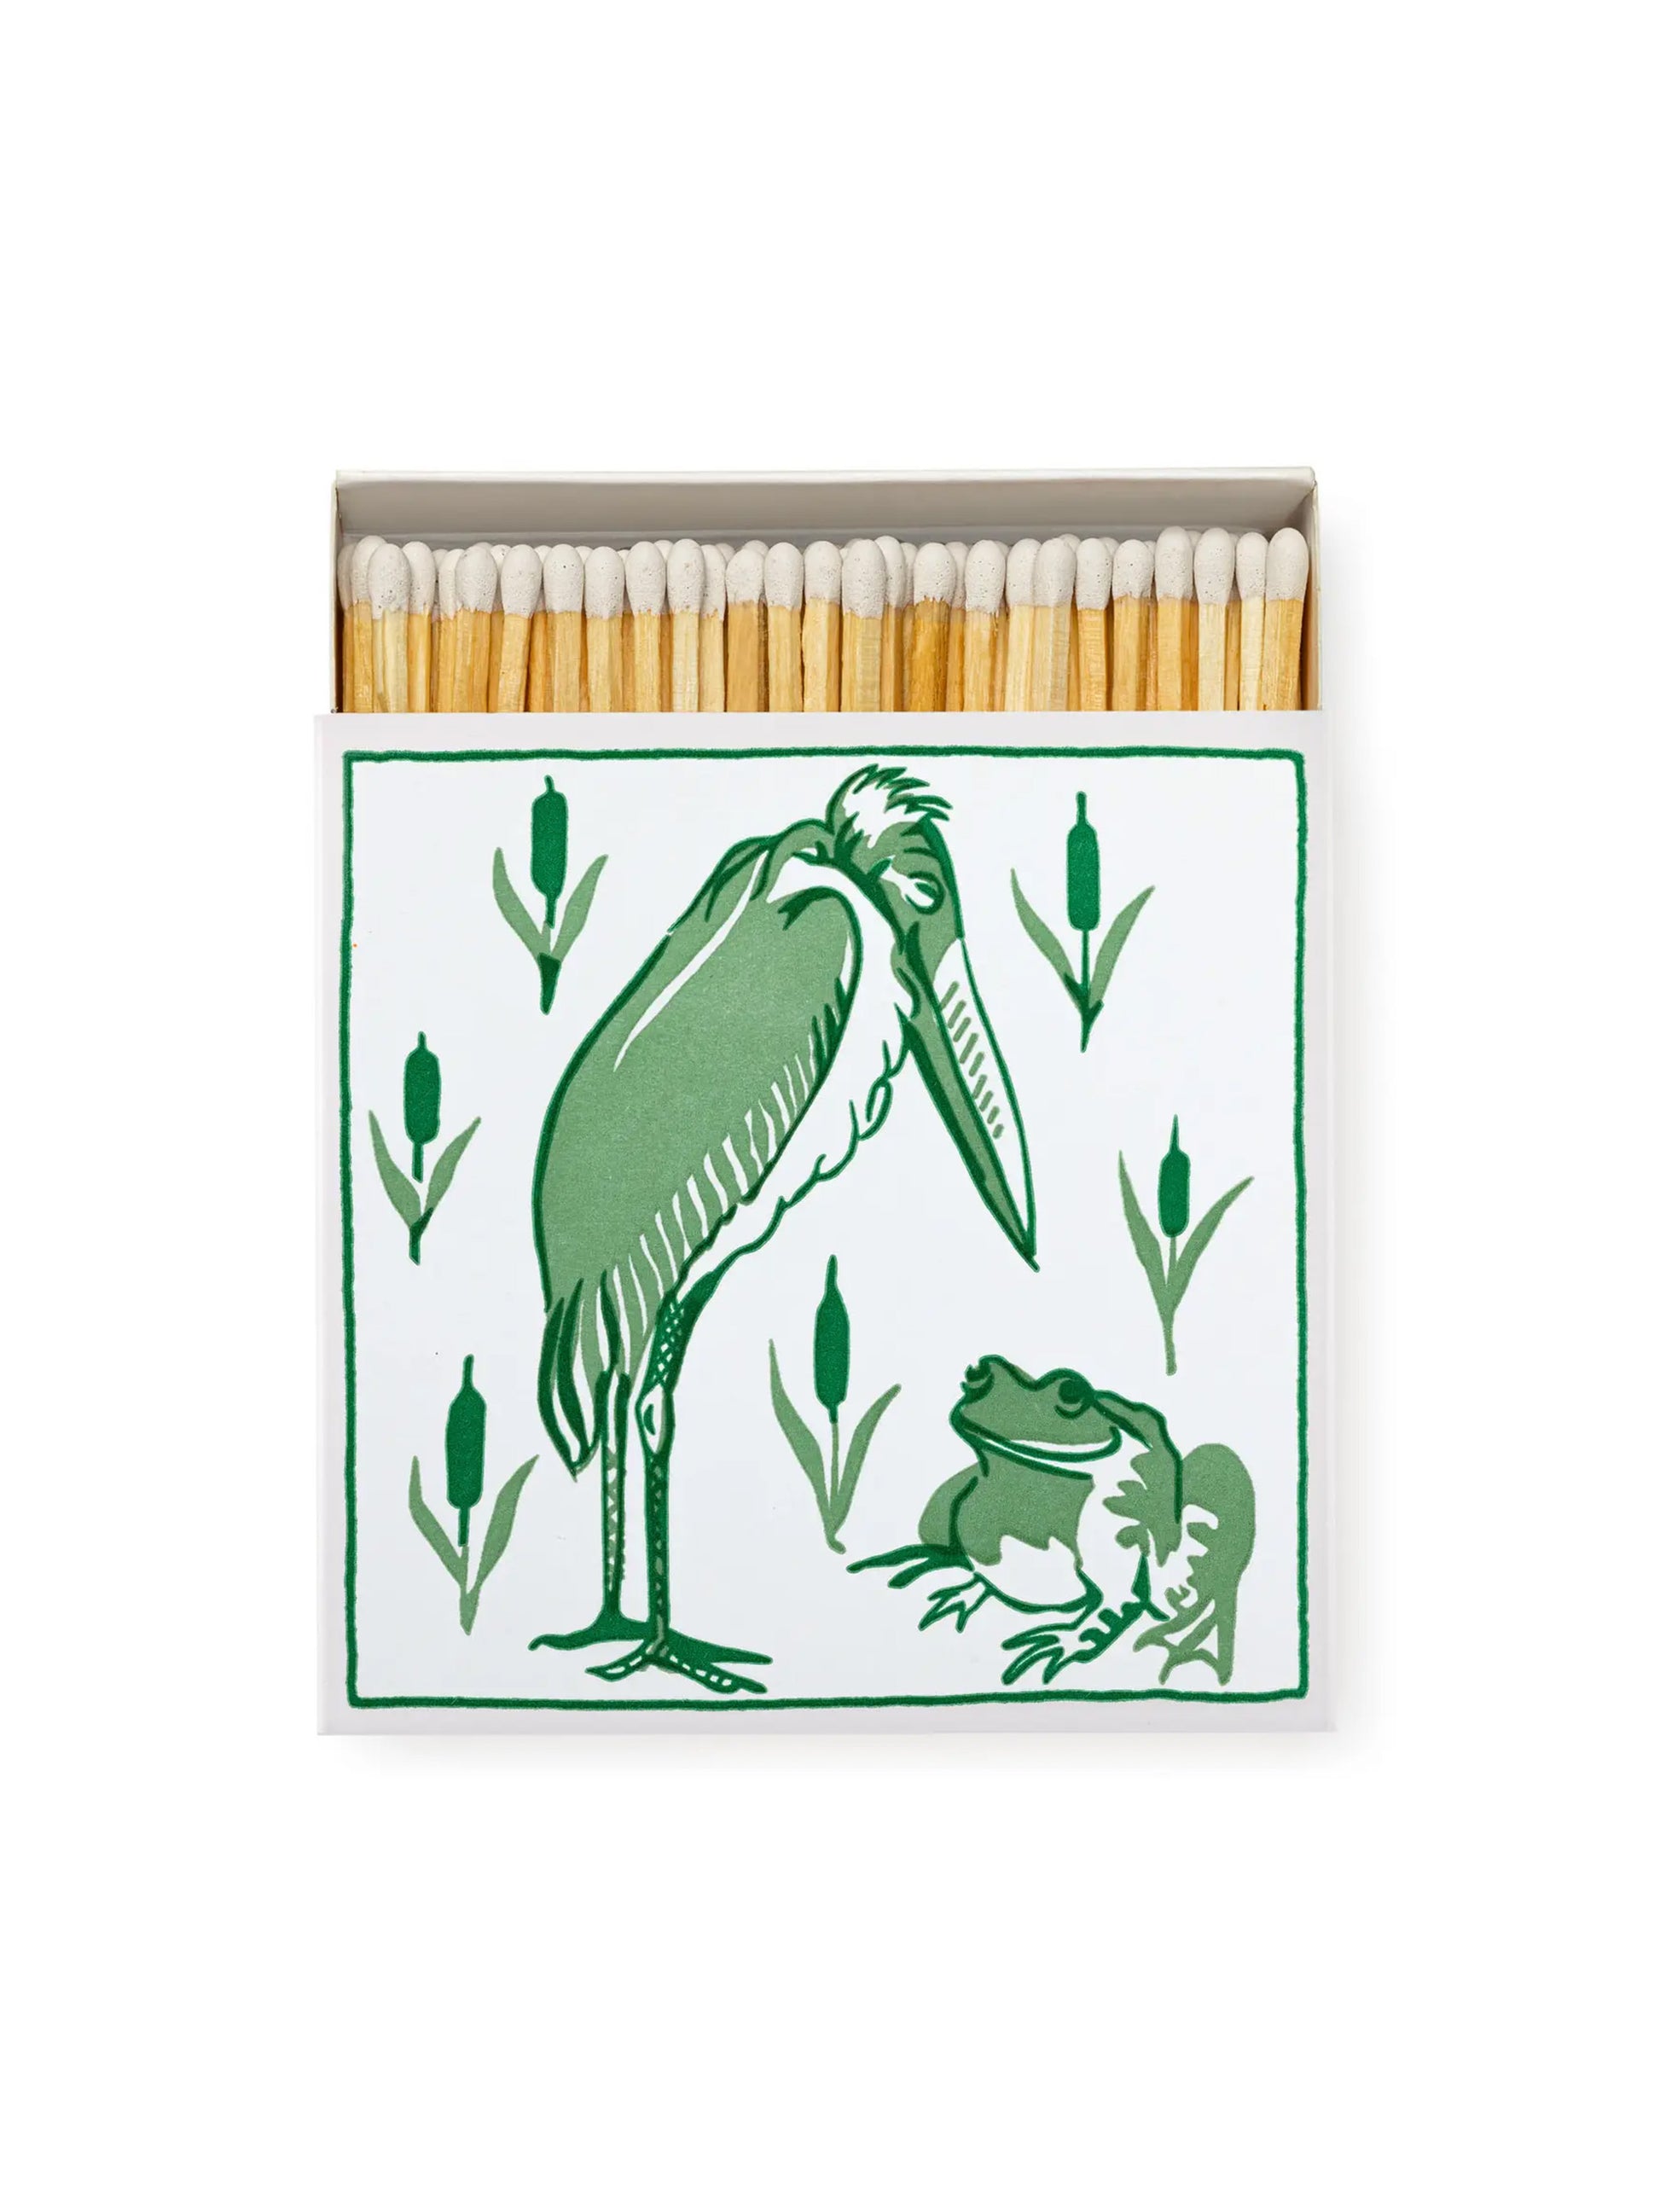 Archivist Gallery Stork and Frog Matchbox Weston Table